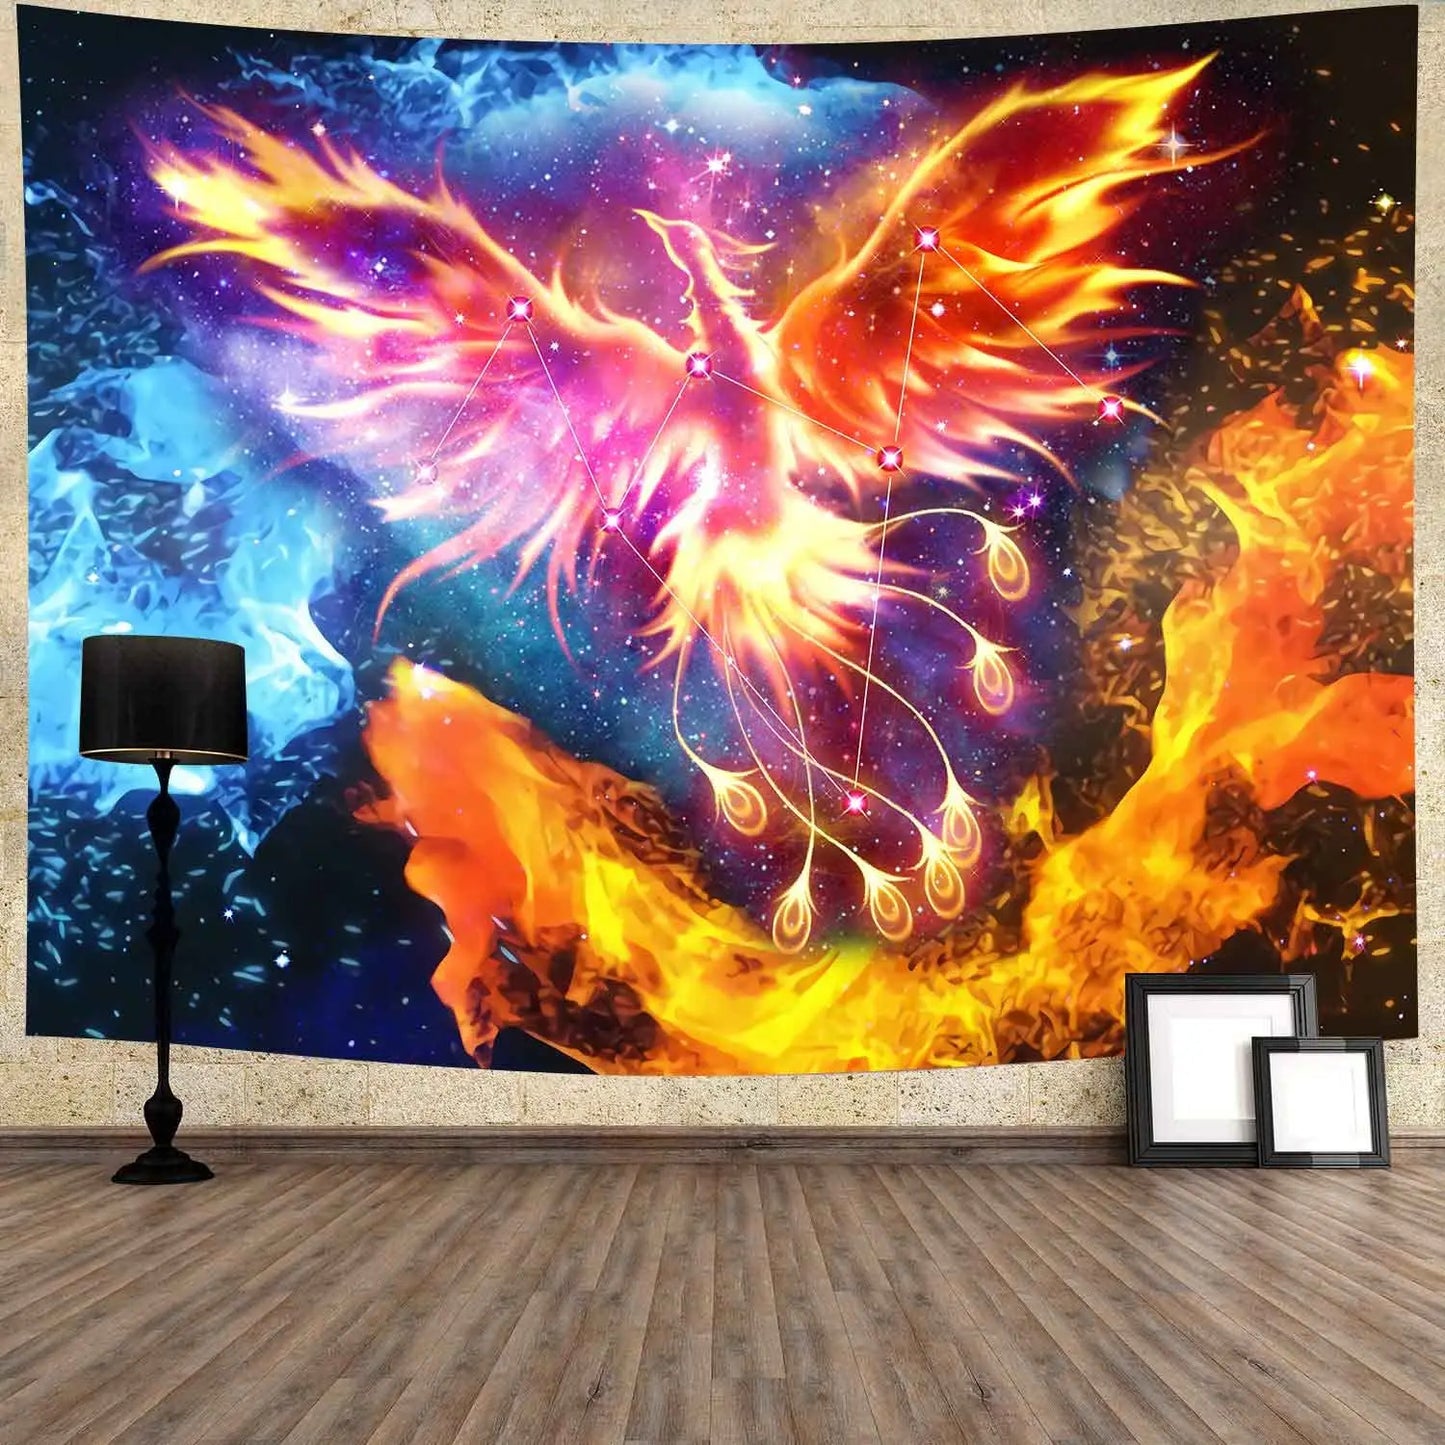 Fantasy Phoenix Bird Tapestry Red Anime Animal Hippie Tapestry Aesthetic Cool Tapestry Wall Hanging for Bedroom Dorm Home Decor